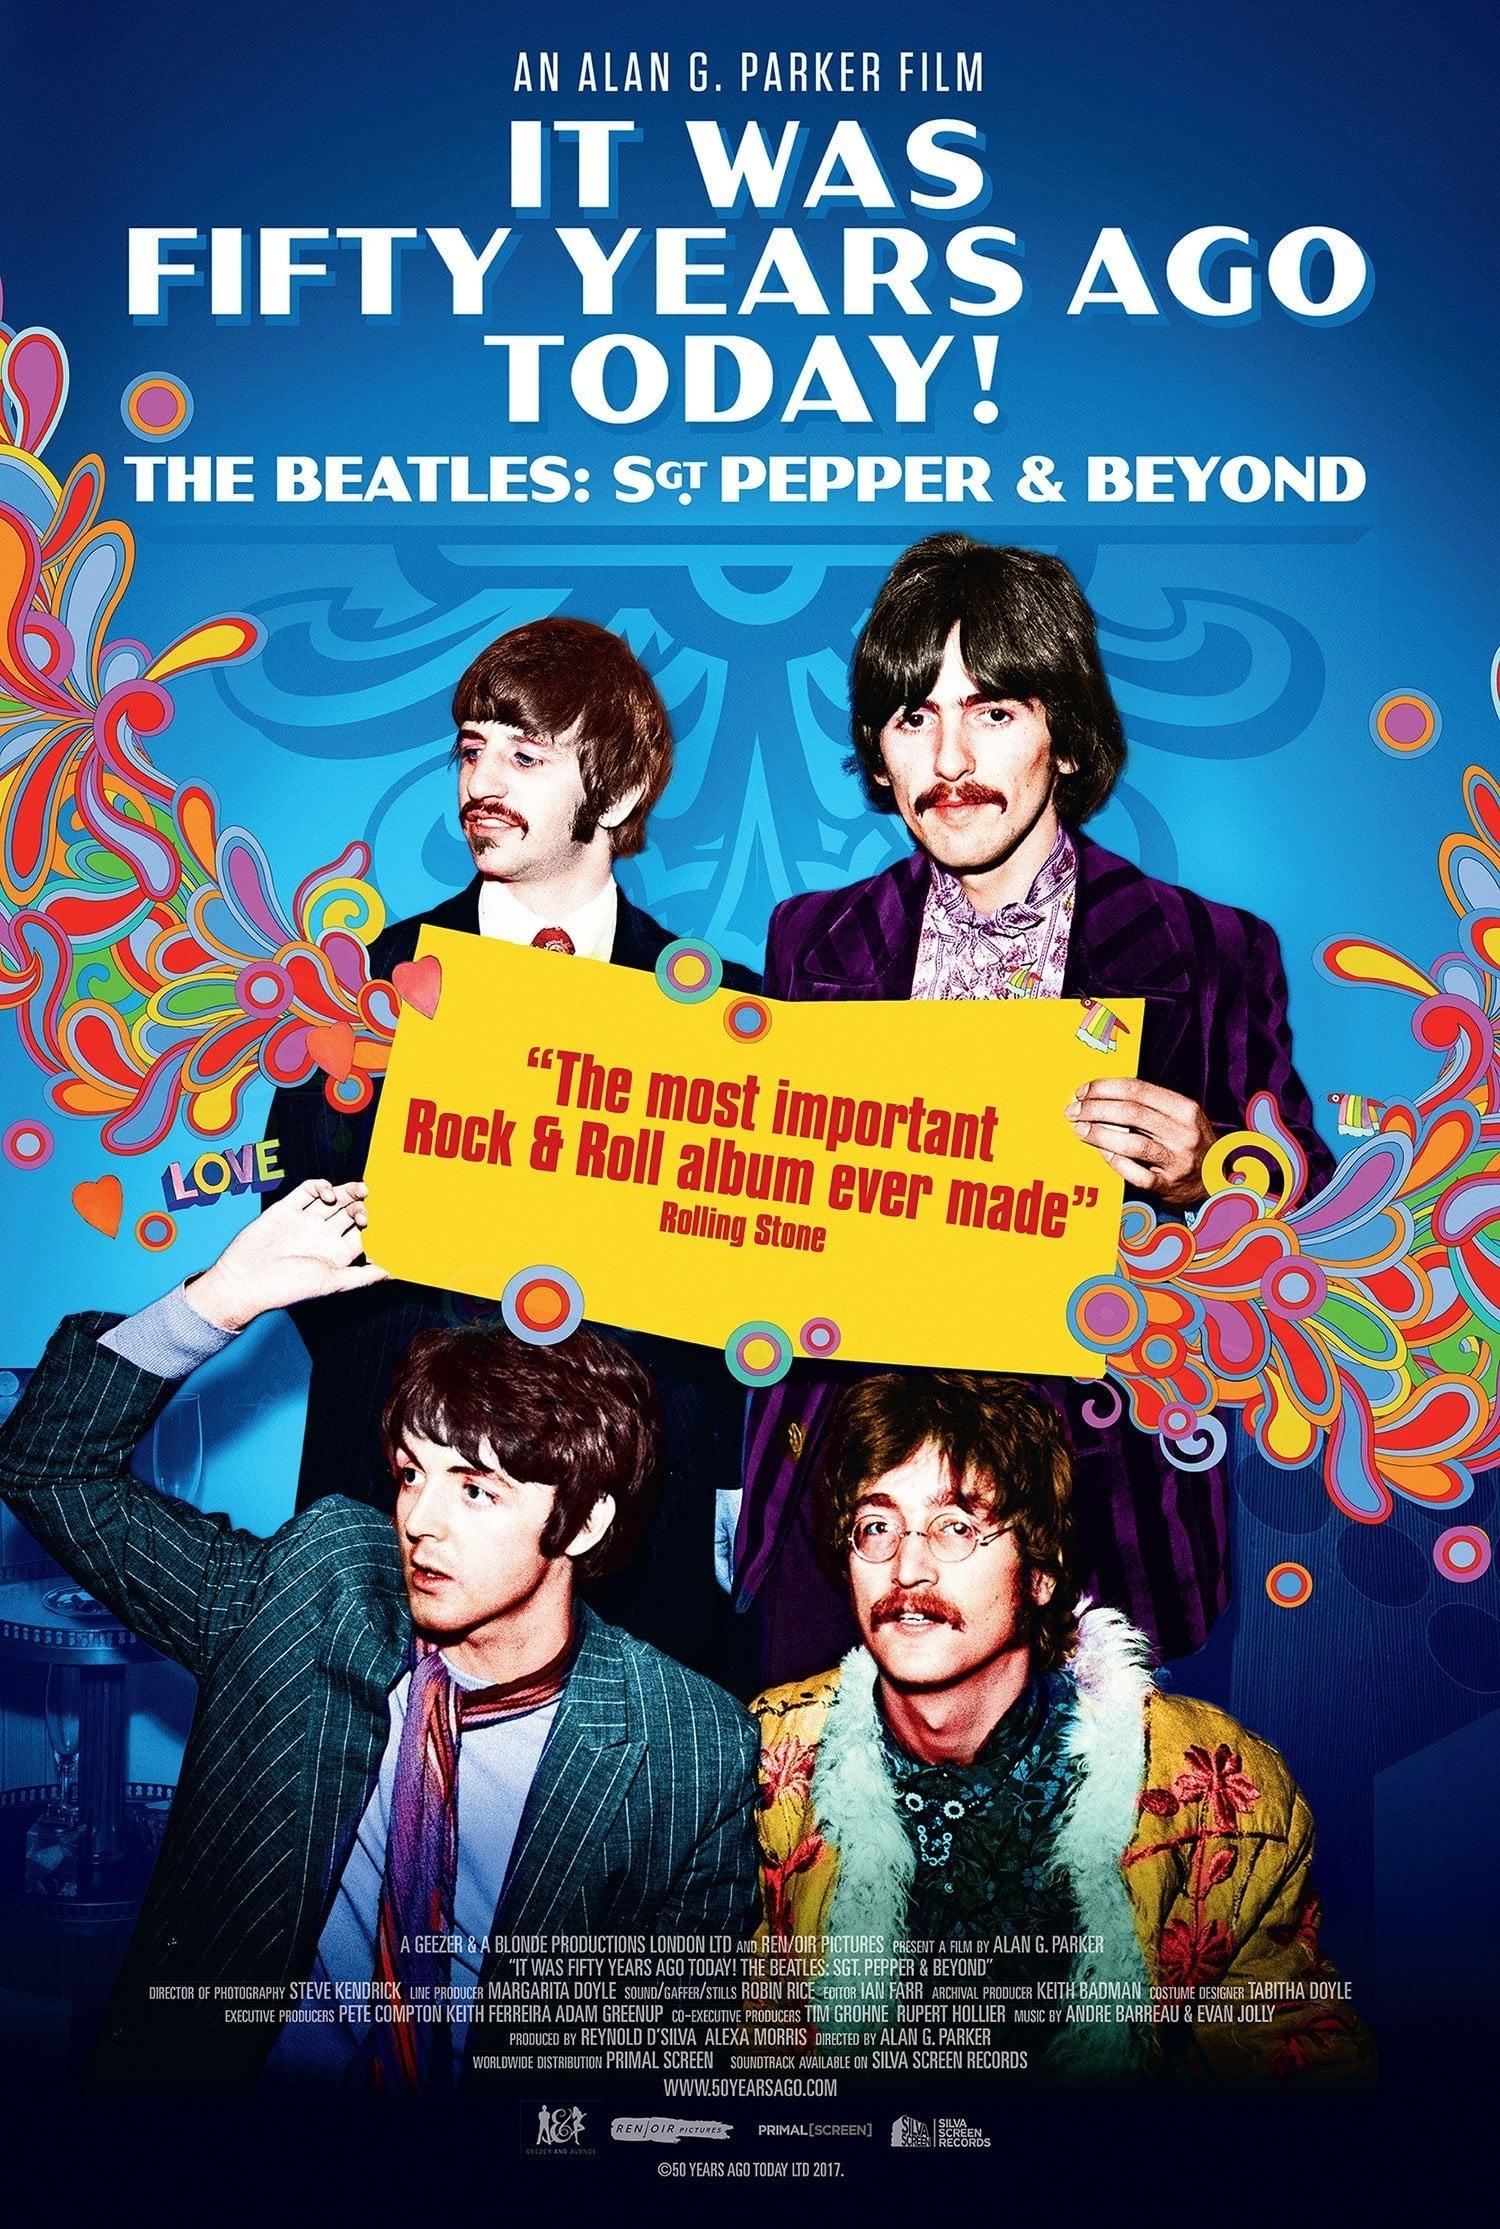 It Was Fifty Years Ago Today! The Beatles: Sgt. Pepper & Beyond poster